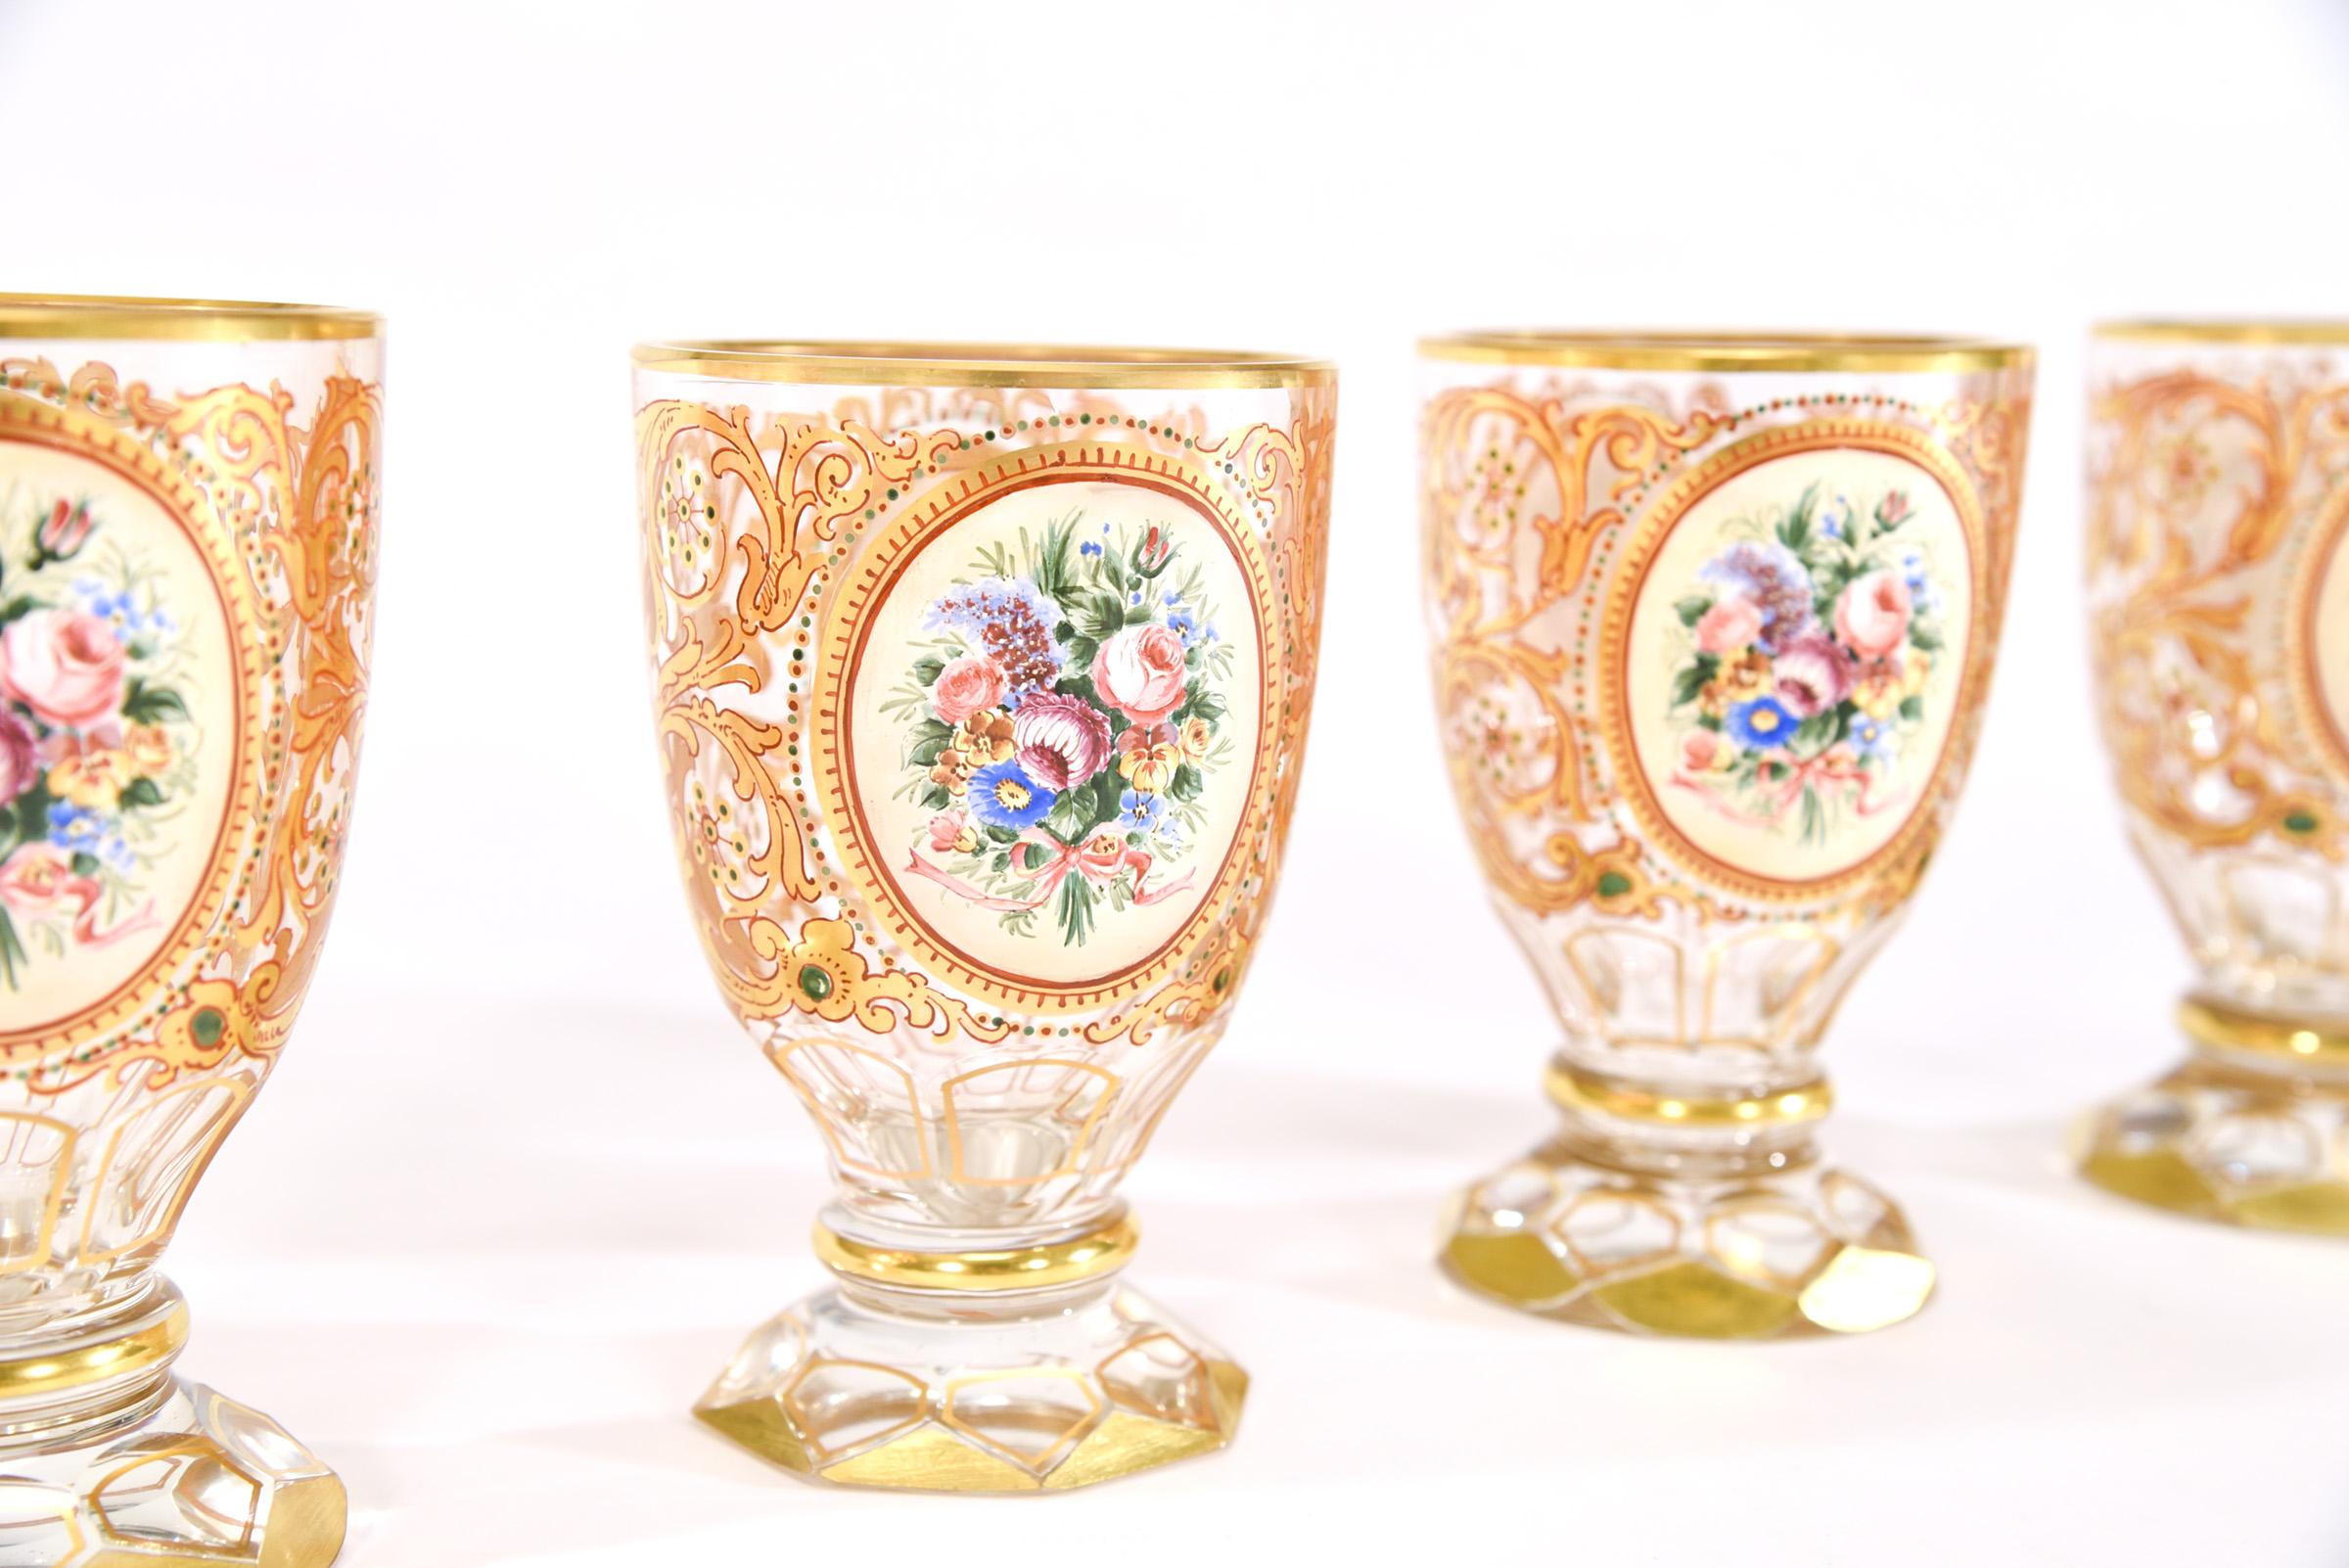 Enameled 12 Bohemian 19th Century Crystal Tumblers with Polychrome Enamel Reserves Gold For Sale